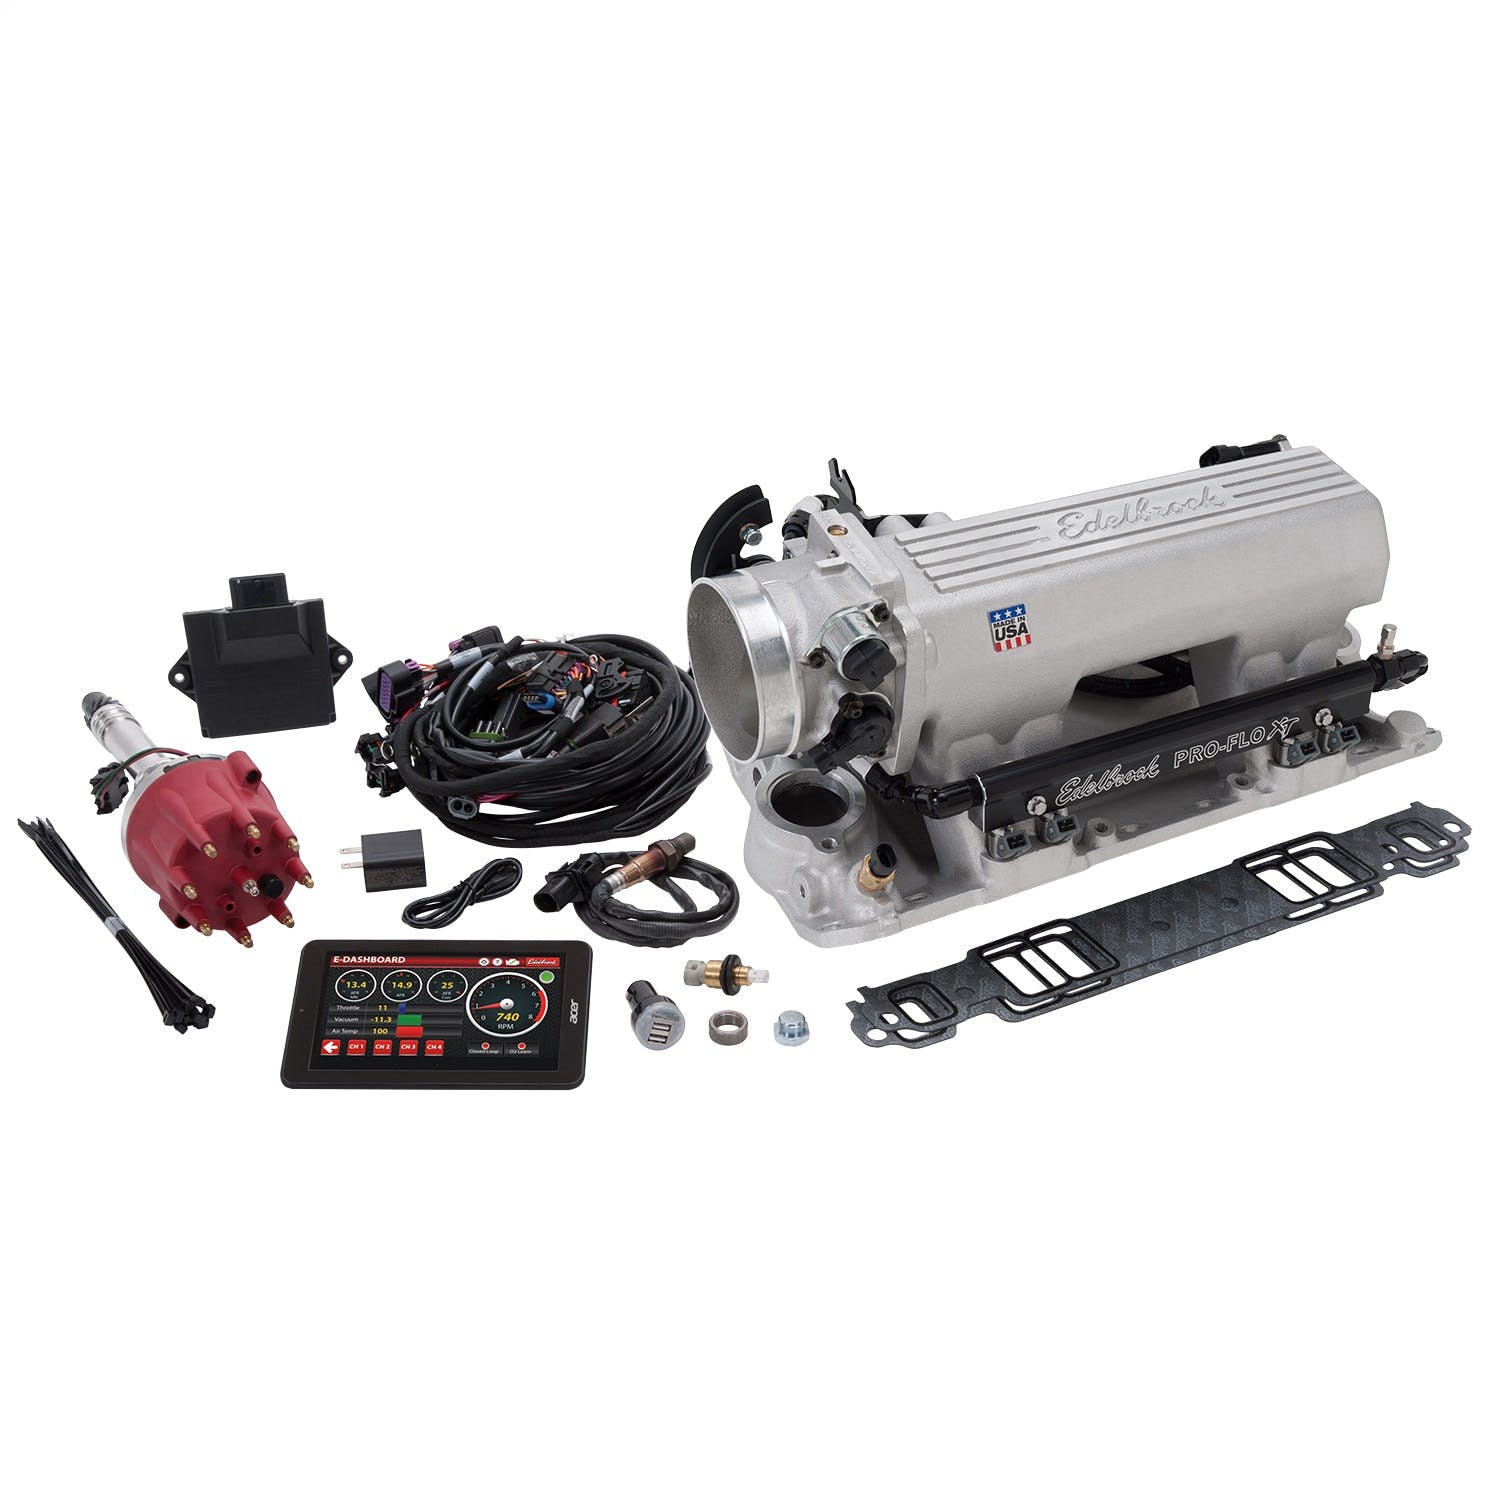 Edelbrock 35790 Pro-Flo 4 XT EFI Kit for 1986 and Earlier Small-Block Chevy Engines